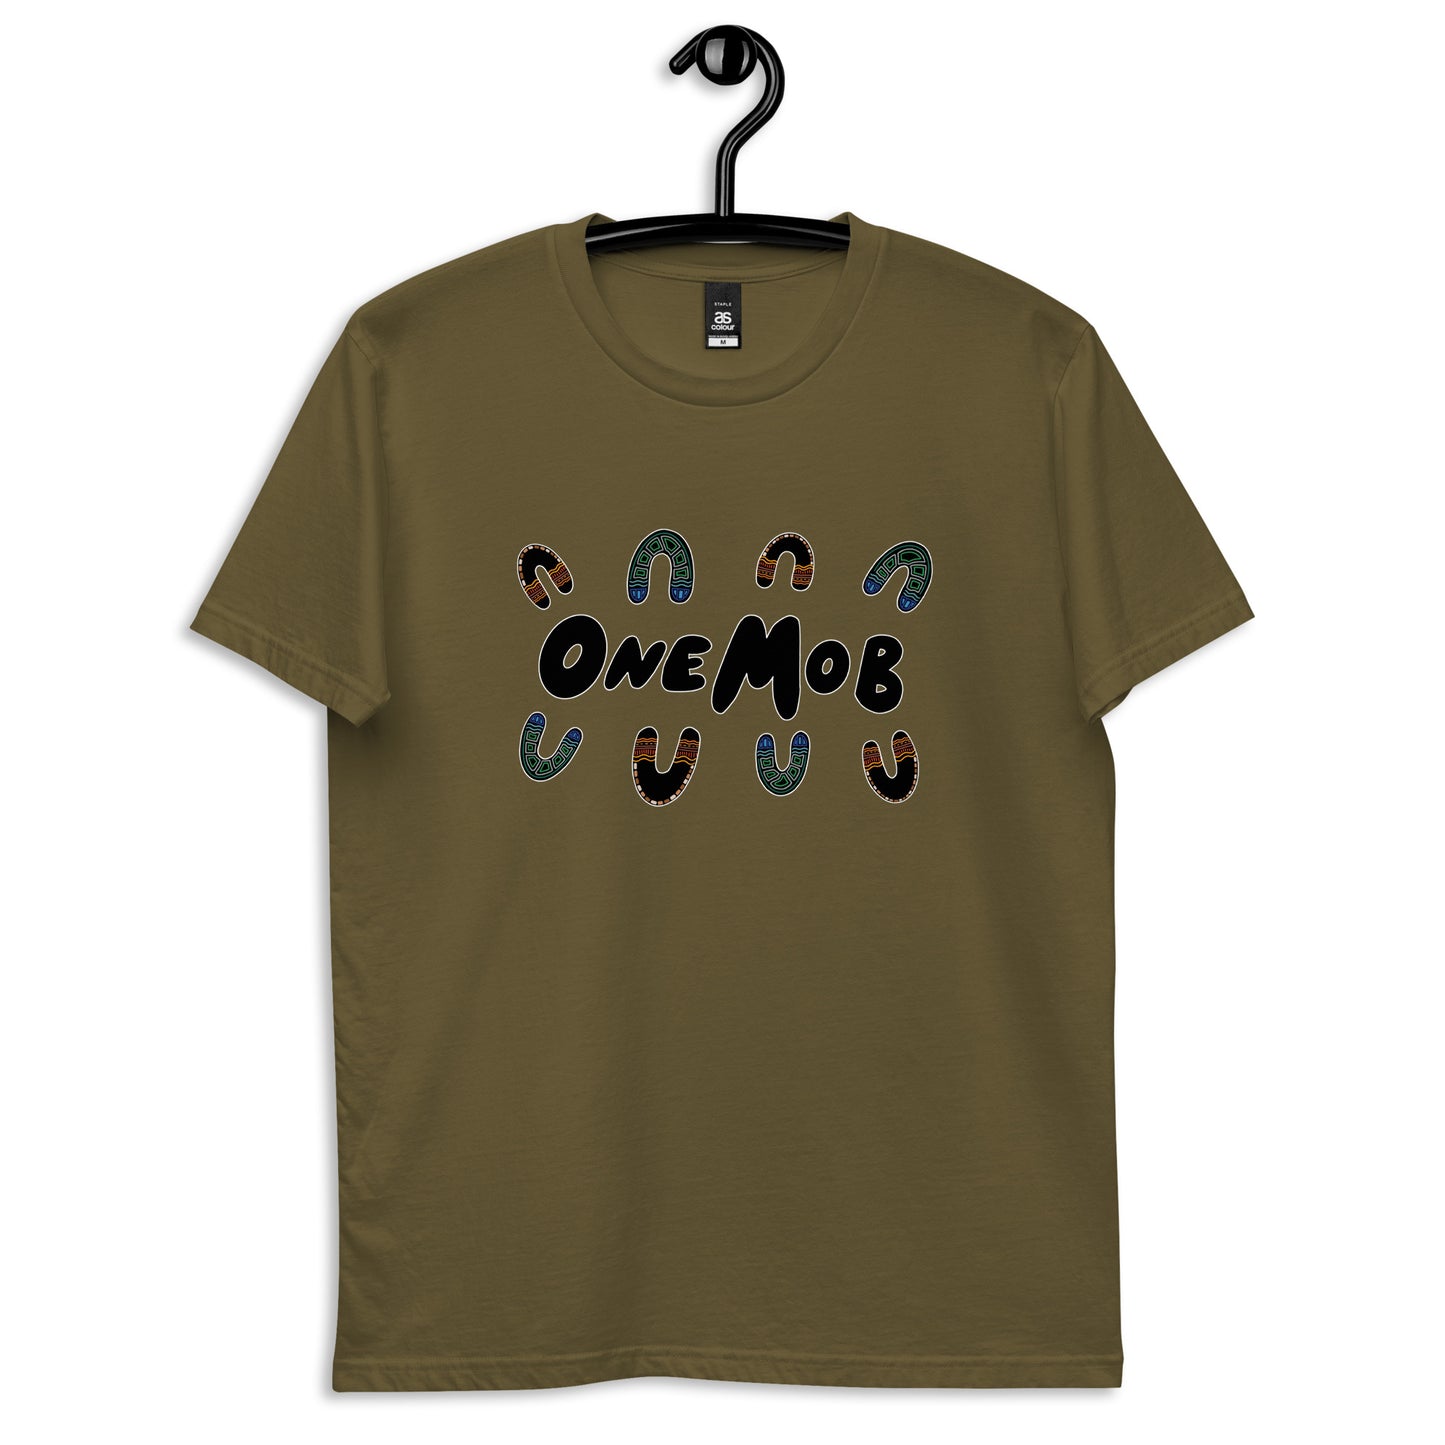 One Mob Men's T-Shirt (2nd edition)